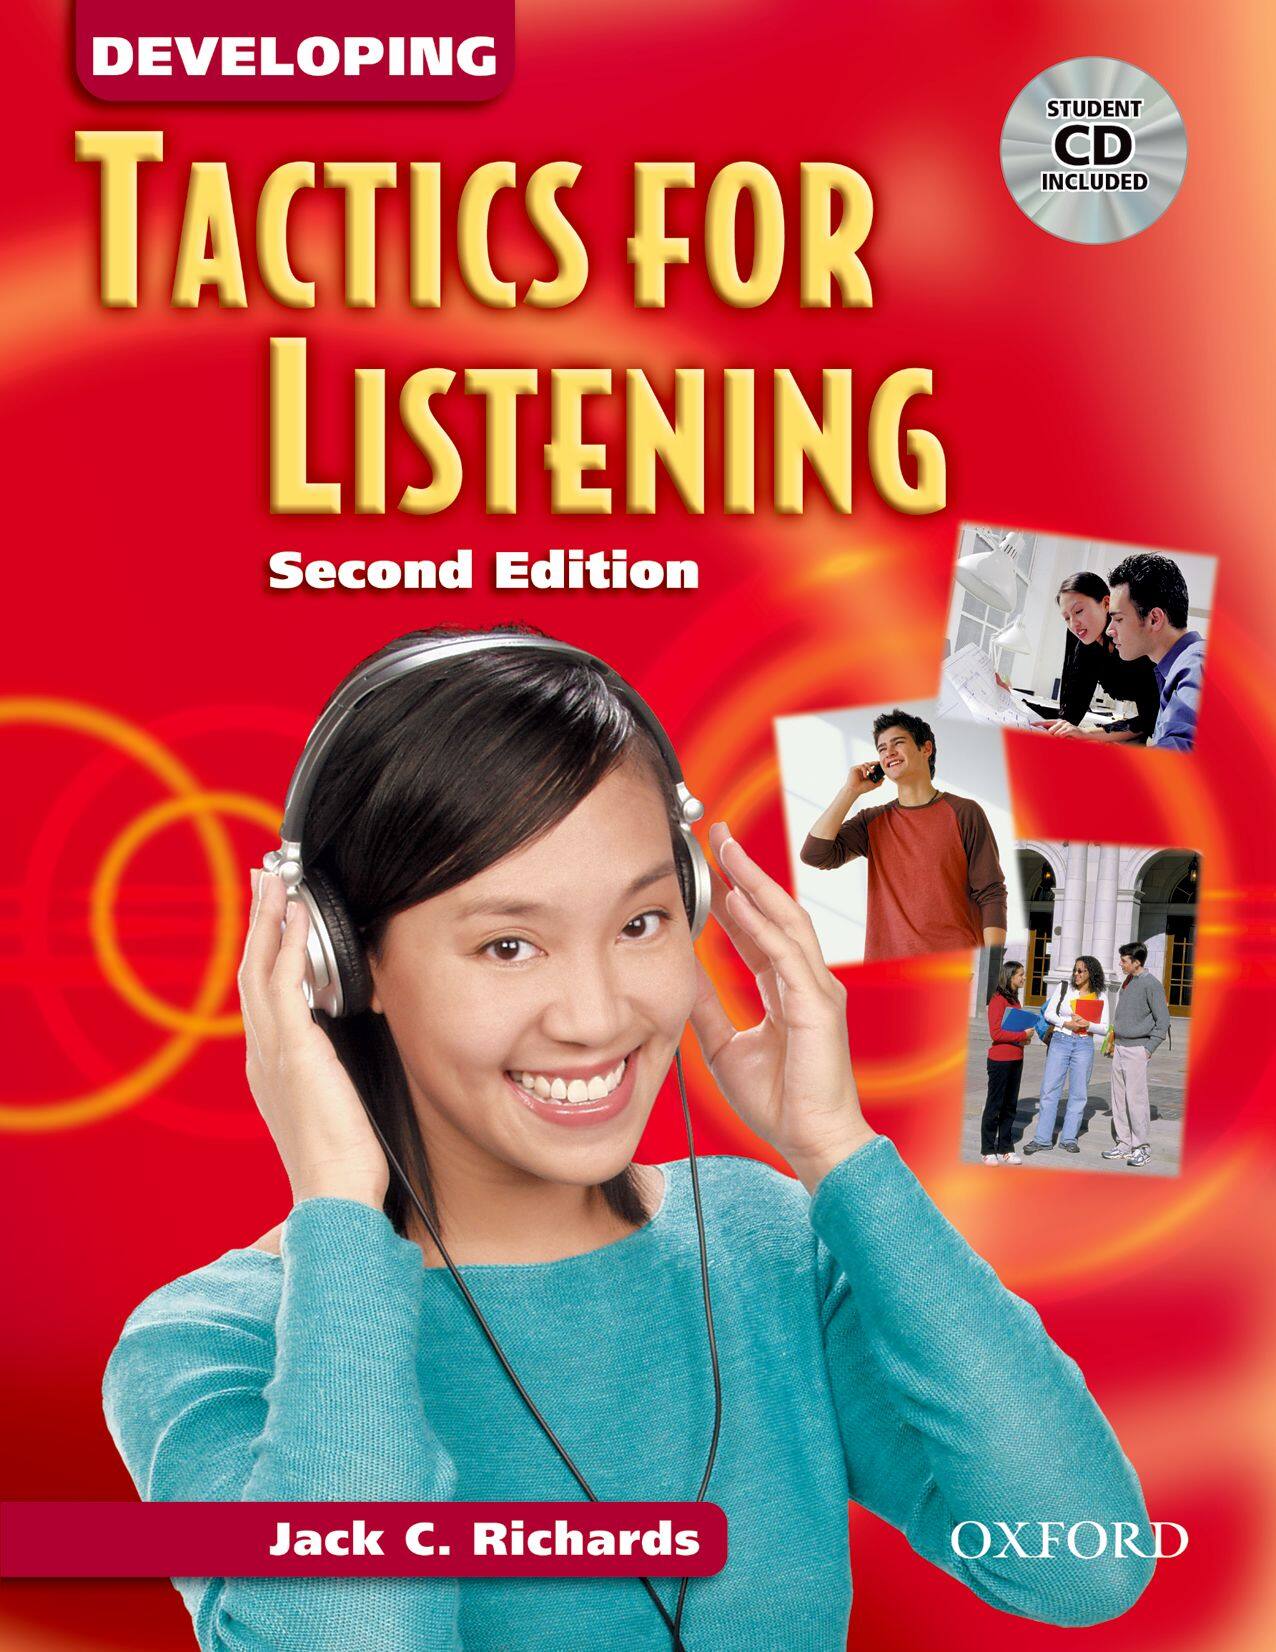 Tactics for Listening 2nd ED Developing: Student's Book (P)